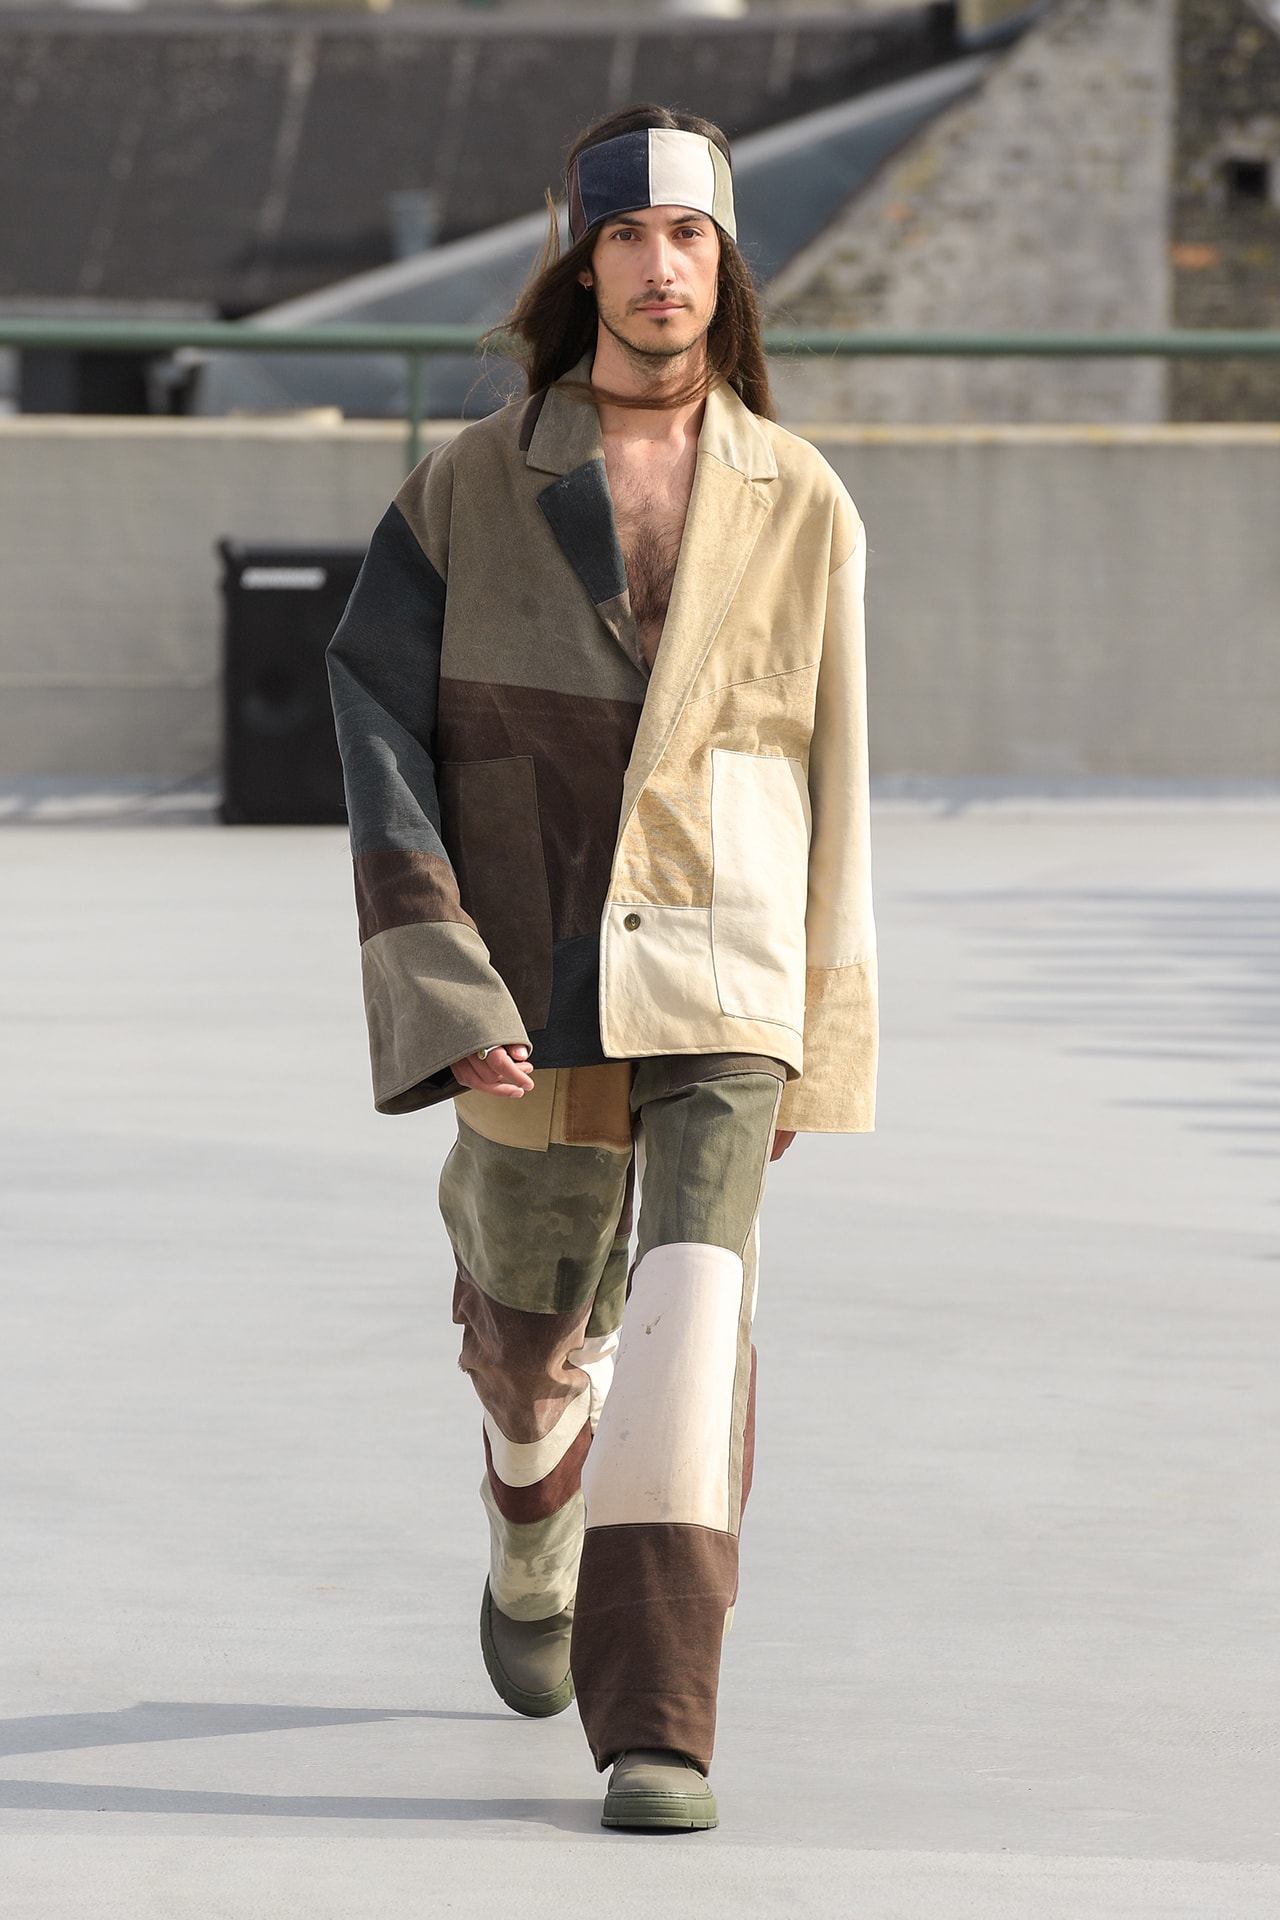 (di)vision Spring Summer 2022 runway show collection division Copenhagen Danish Brand Fashion Design Simon Nanna Wick upcycling patchwork suit